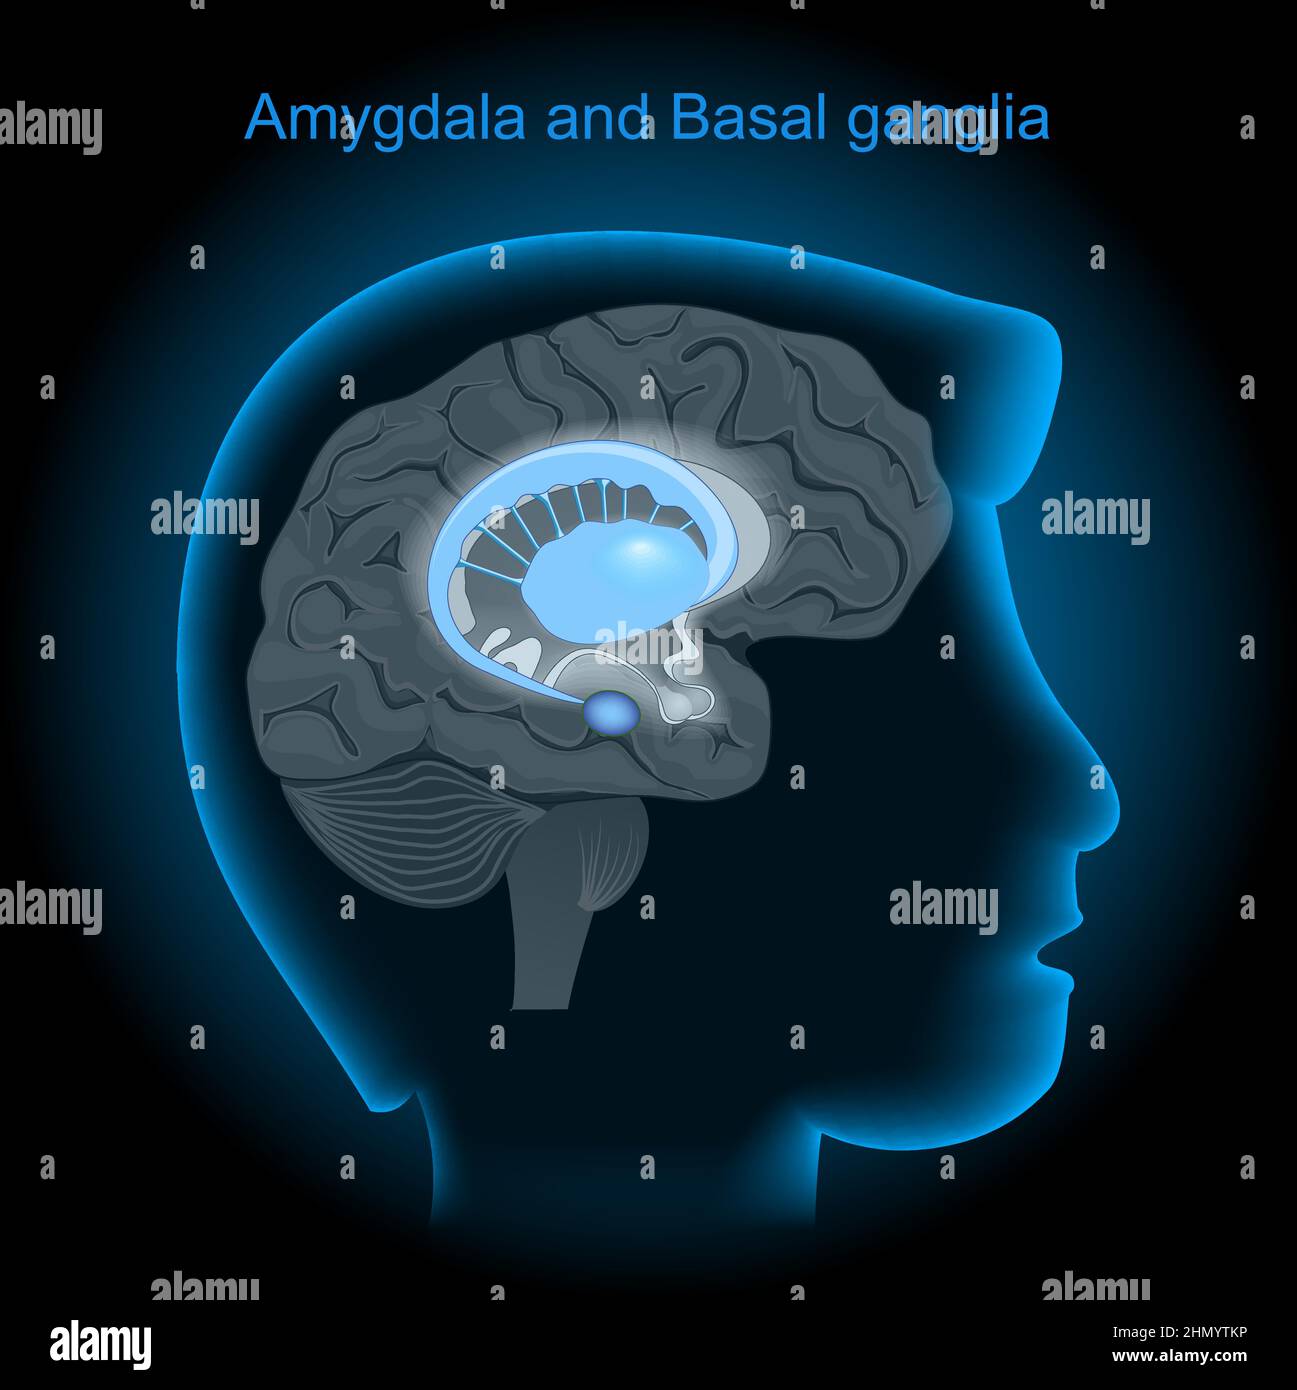 Location of the amygdalae and basal ganglia in the human brain. Amygdala and Limbic system. Human's head with brain on dark background. side view of b Stock Vector